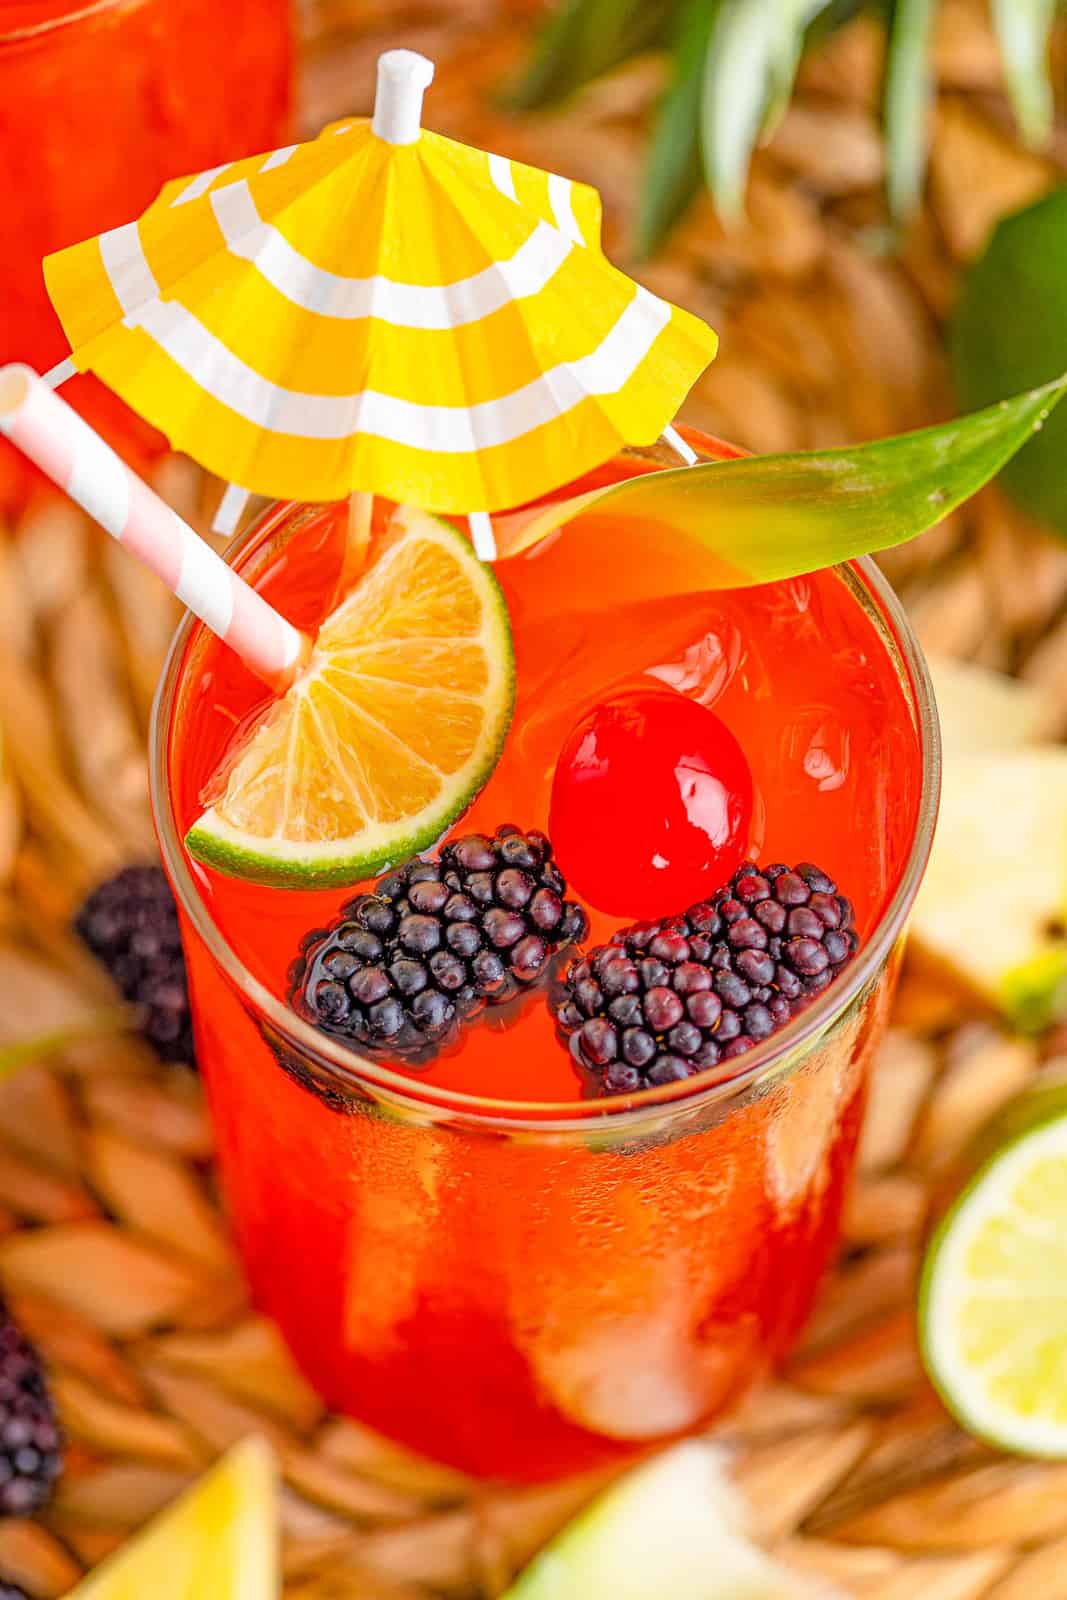 Overhead of a Rum Runner garnished with fruit and a yellow umbrella.